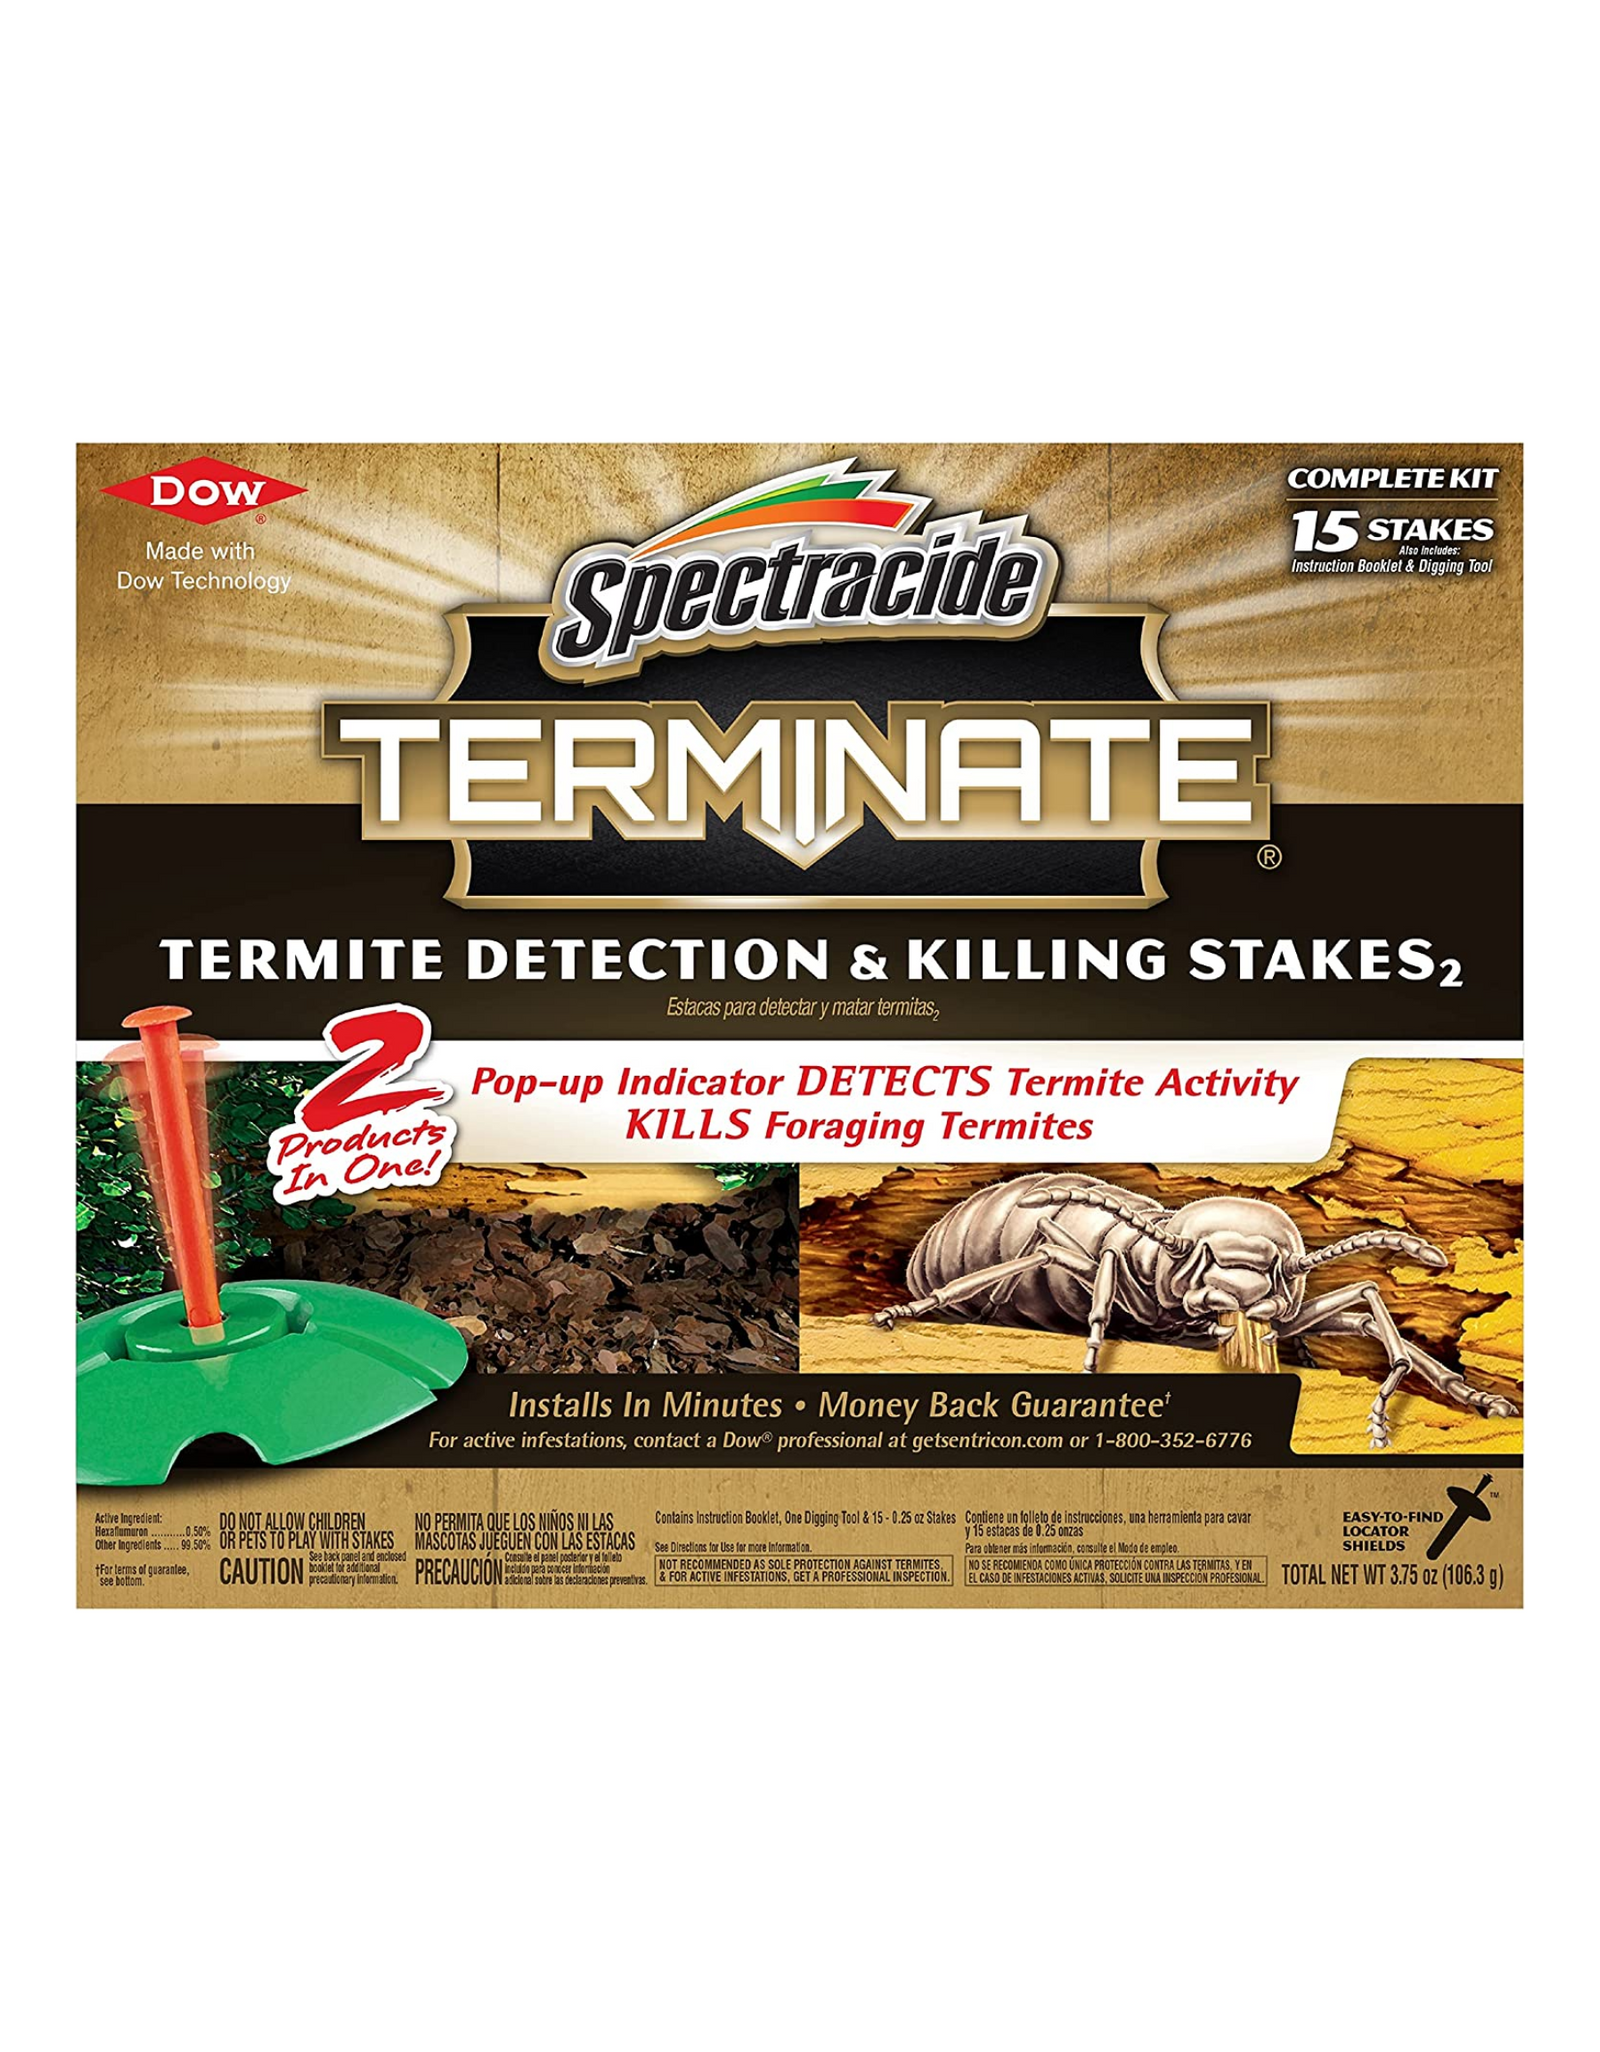 Spectracide Terminate Termite Detection and Killing Stakes, Made with Dow Technololgy, 15 Ct